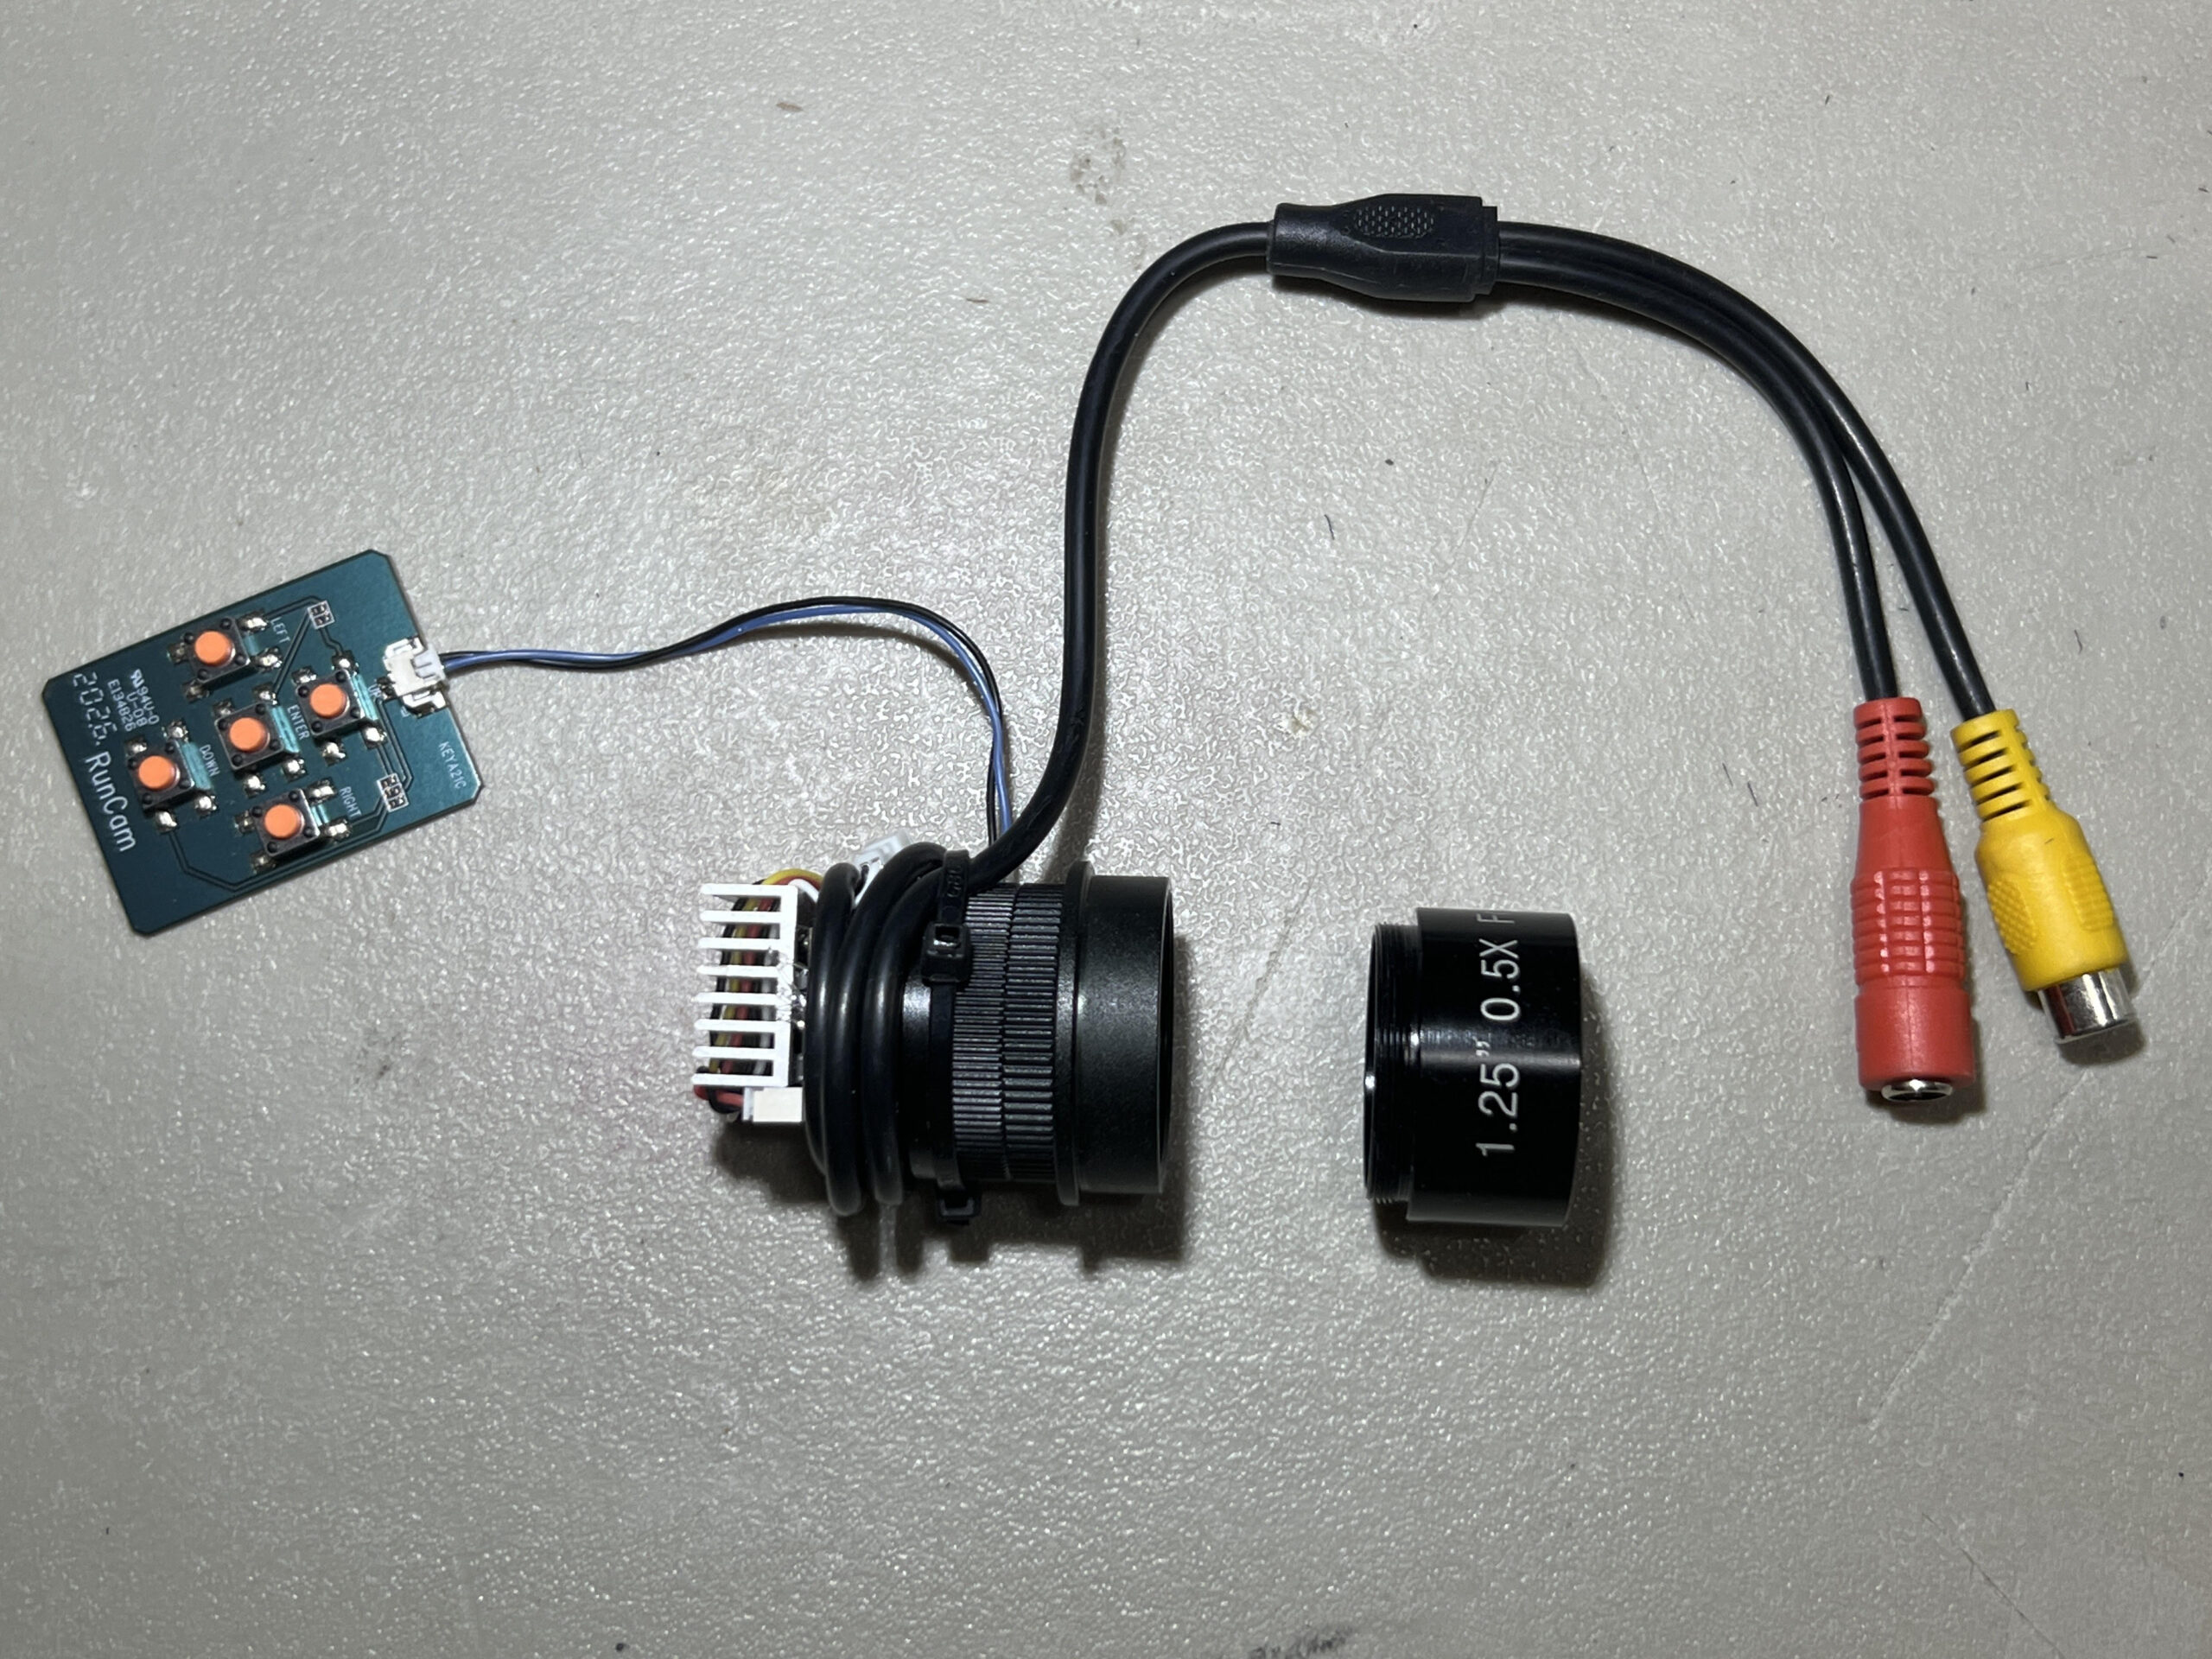 Kit 1 - Runcam Night Eagle 3 with heat sink, cables, original lens, all adapters and a 0.5X Focal Reducer